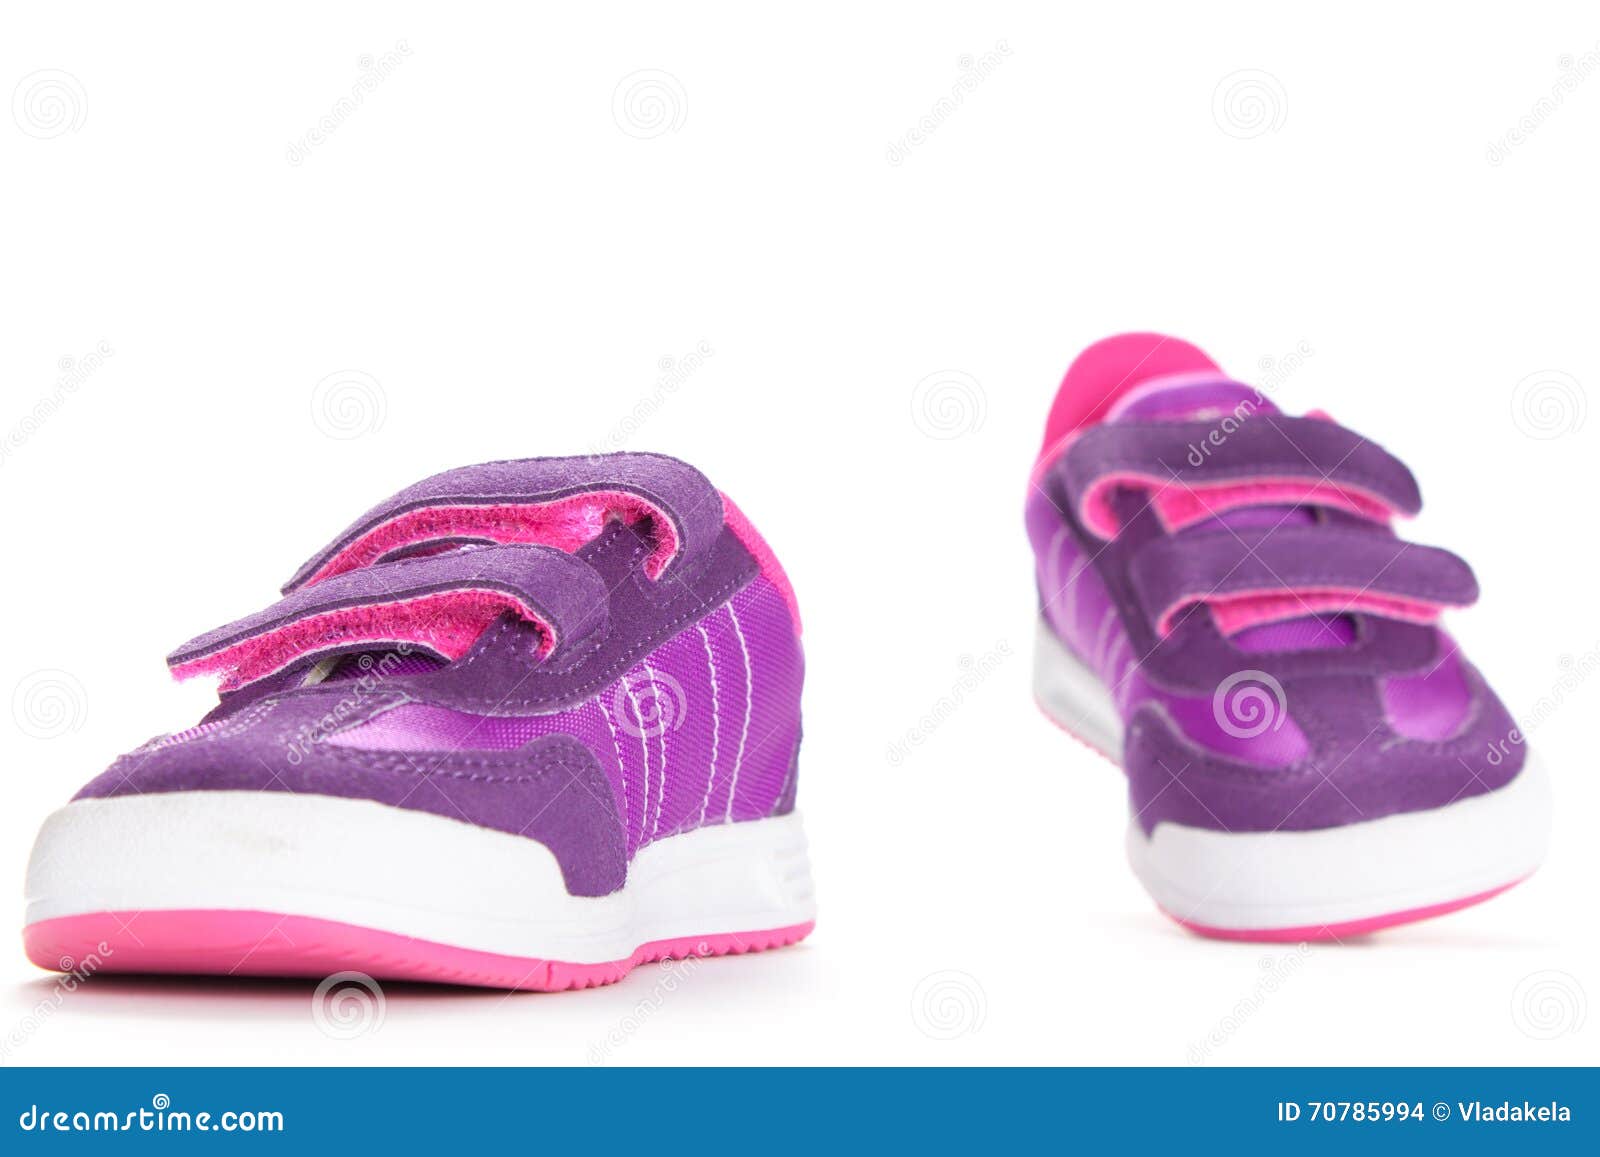 Pair of Pink Sport Shoes on White Background Stock Photo - Image of ...